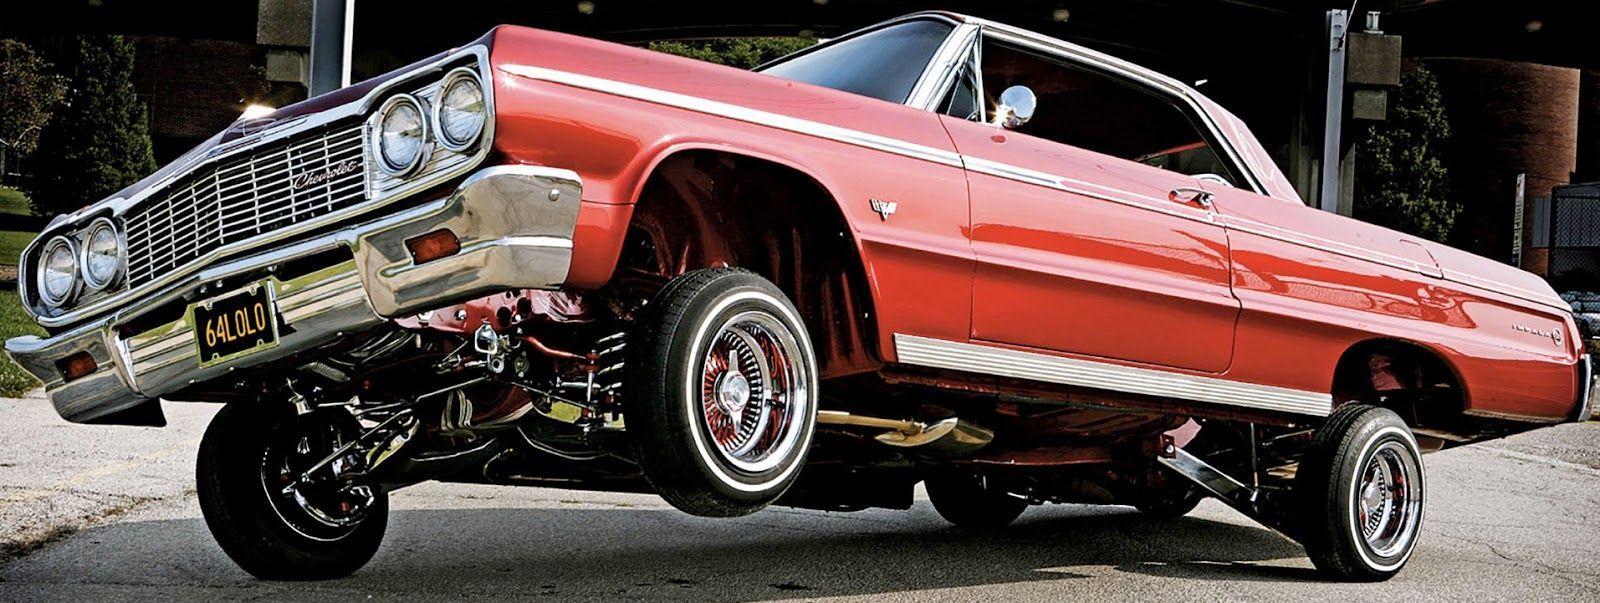 557105 car low lowrider red rider vintage car 4k  Rare Gallery HD  Wallpapers